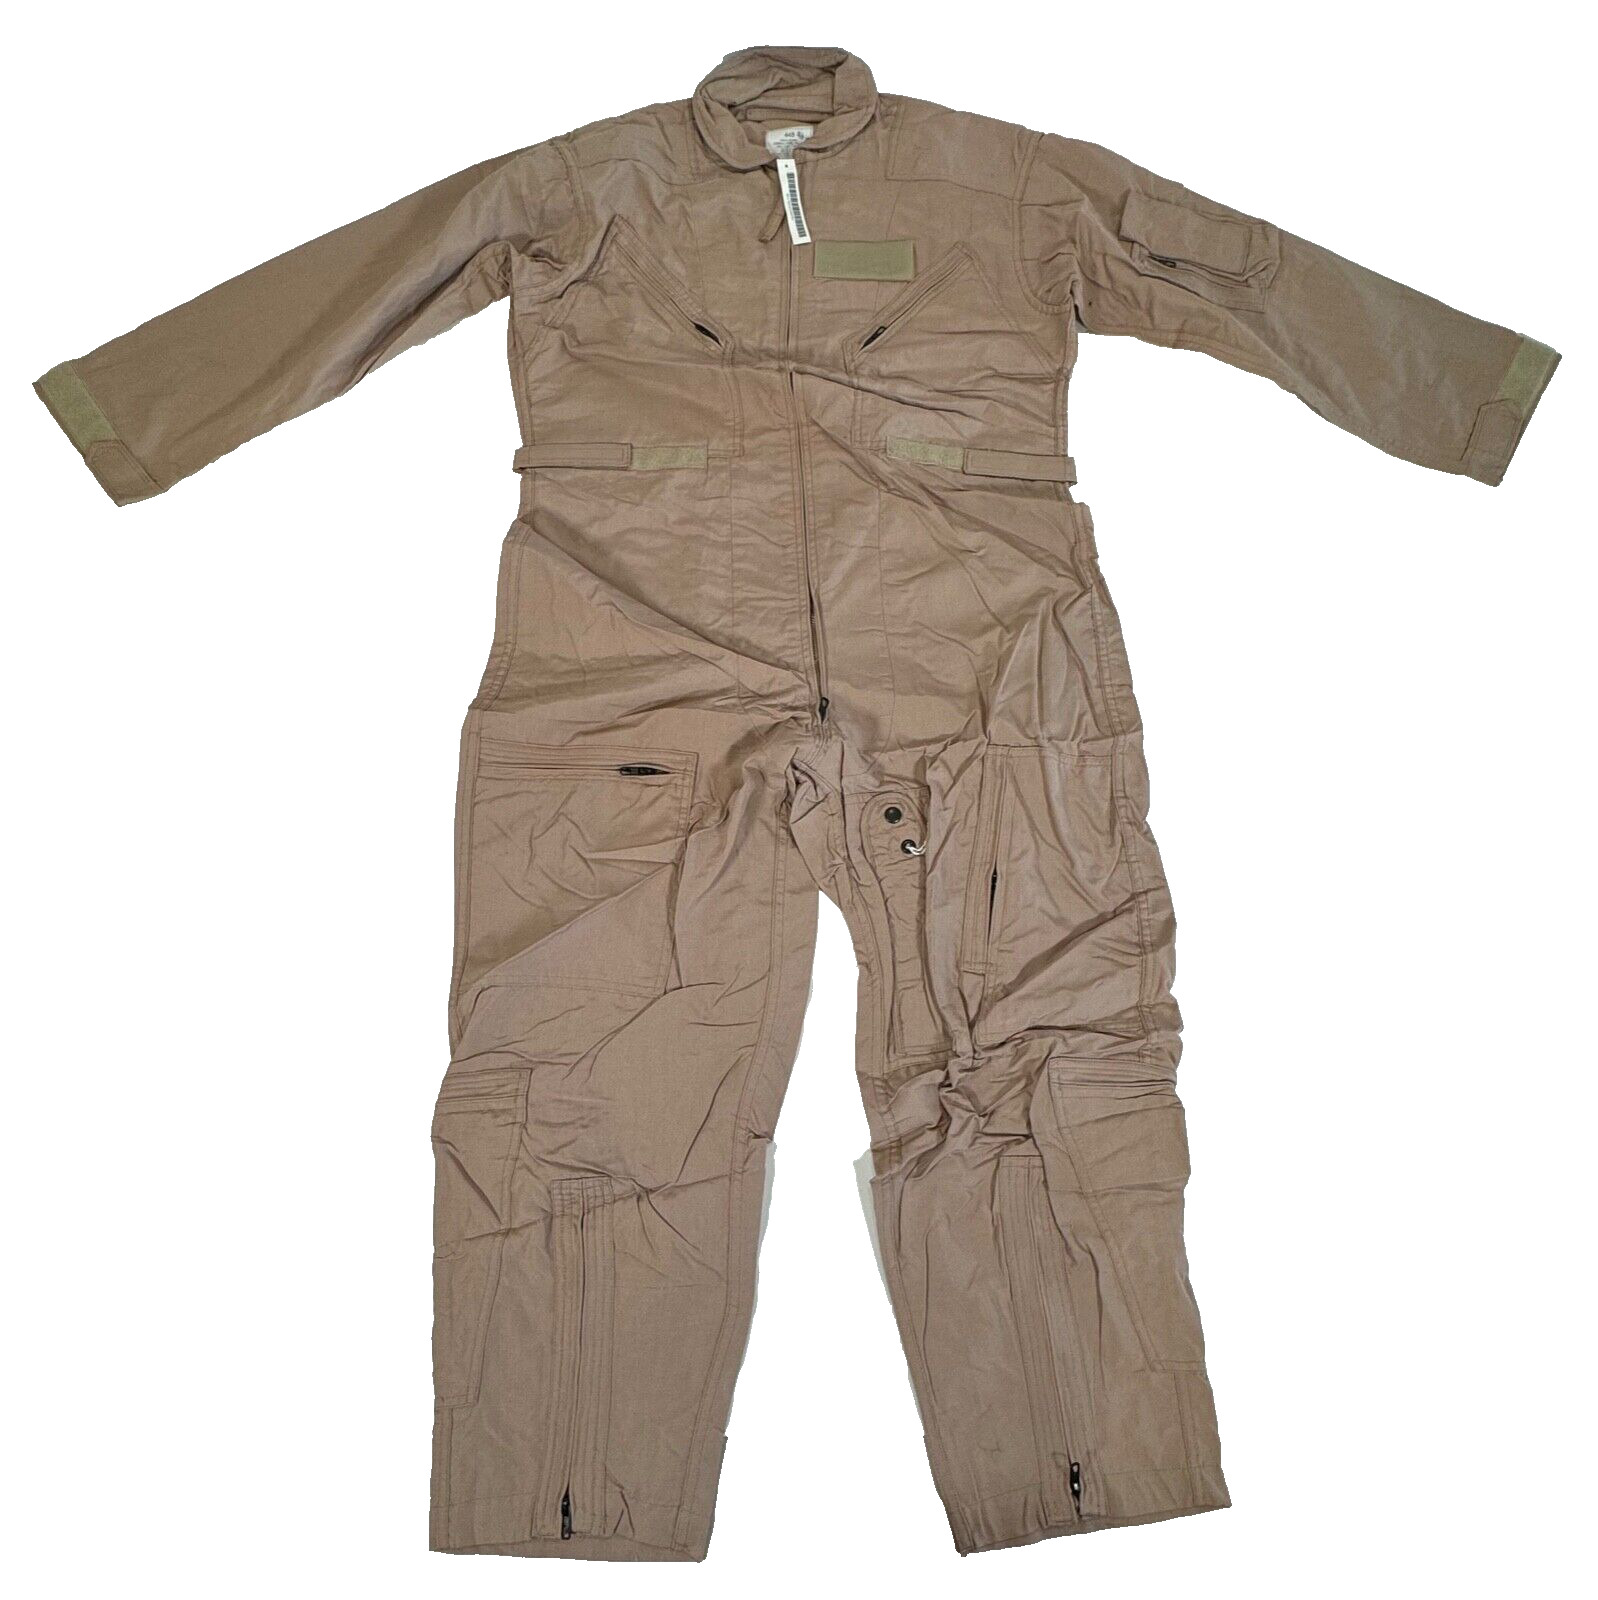 New USAF Military CWU-27/P Flyers Coveralls Flight Suit Desert Tan Size 44S